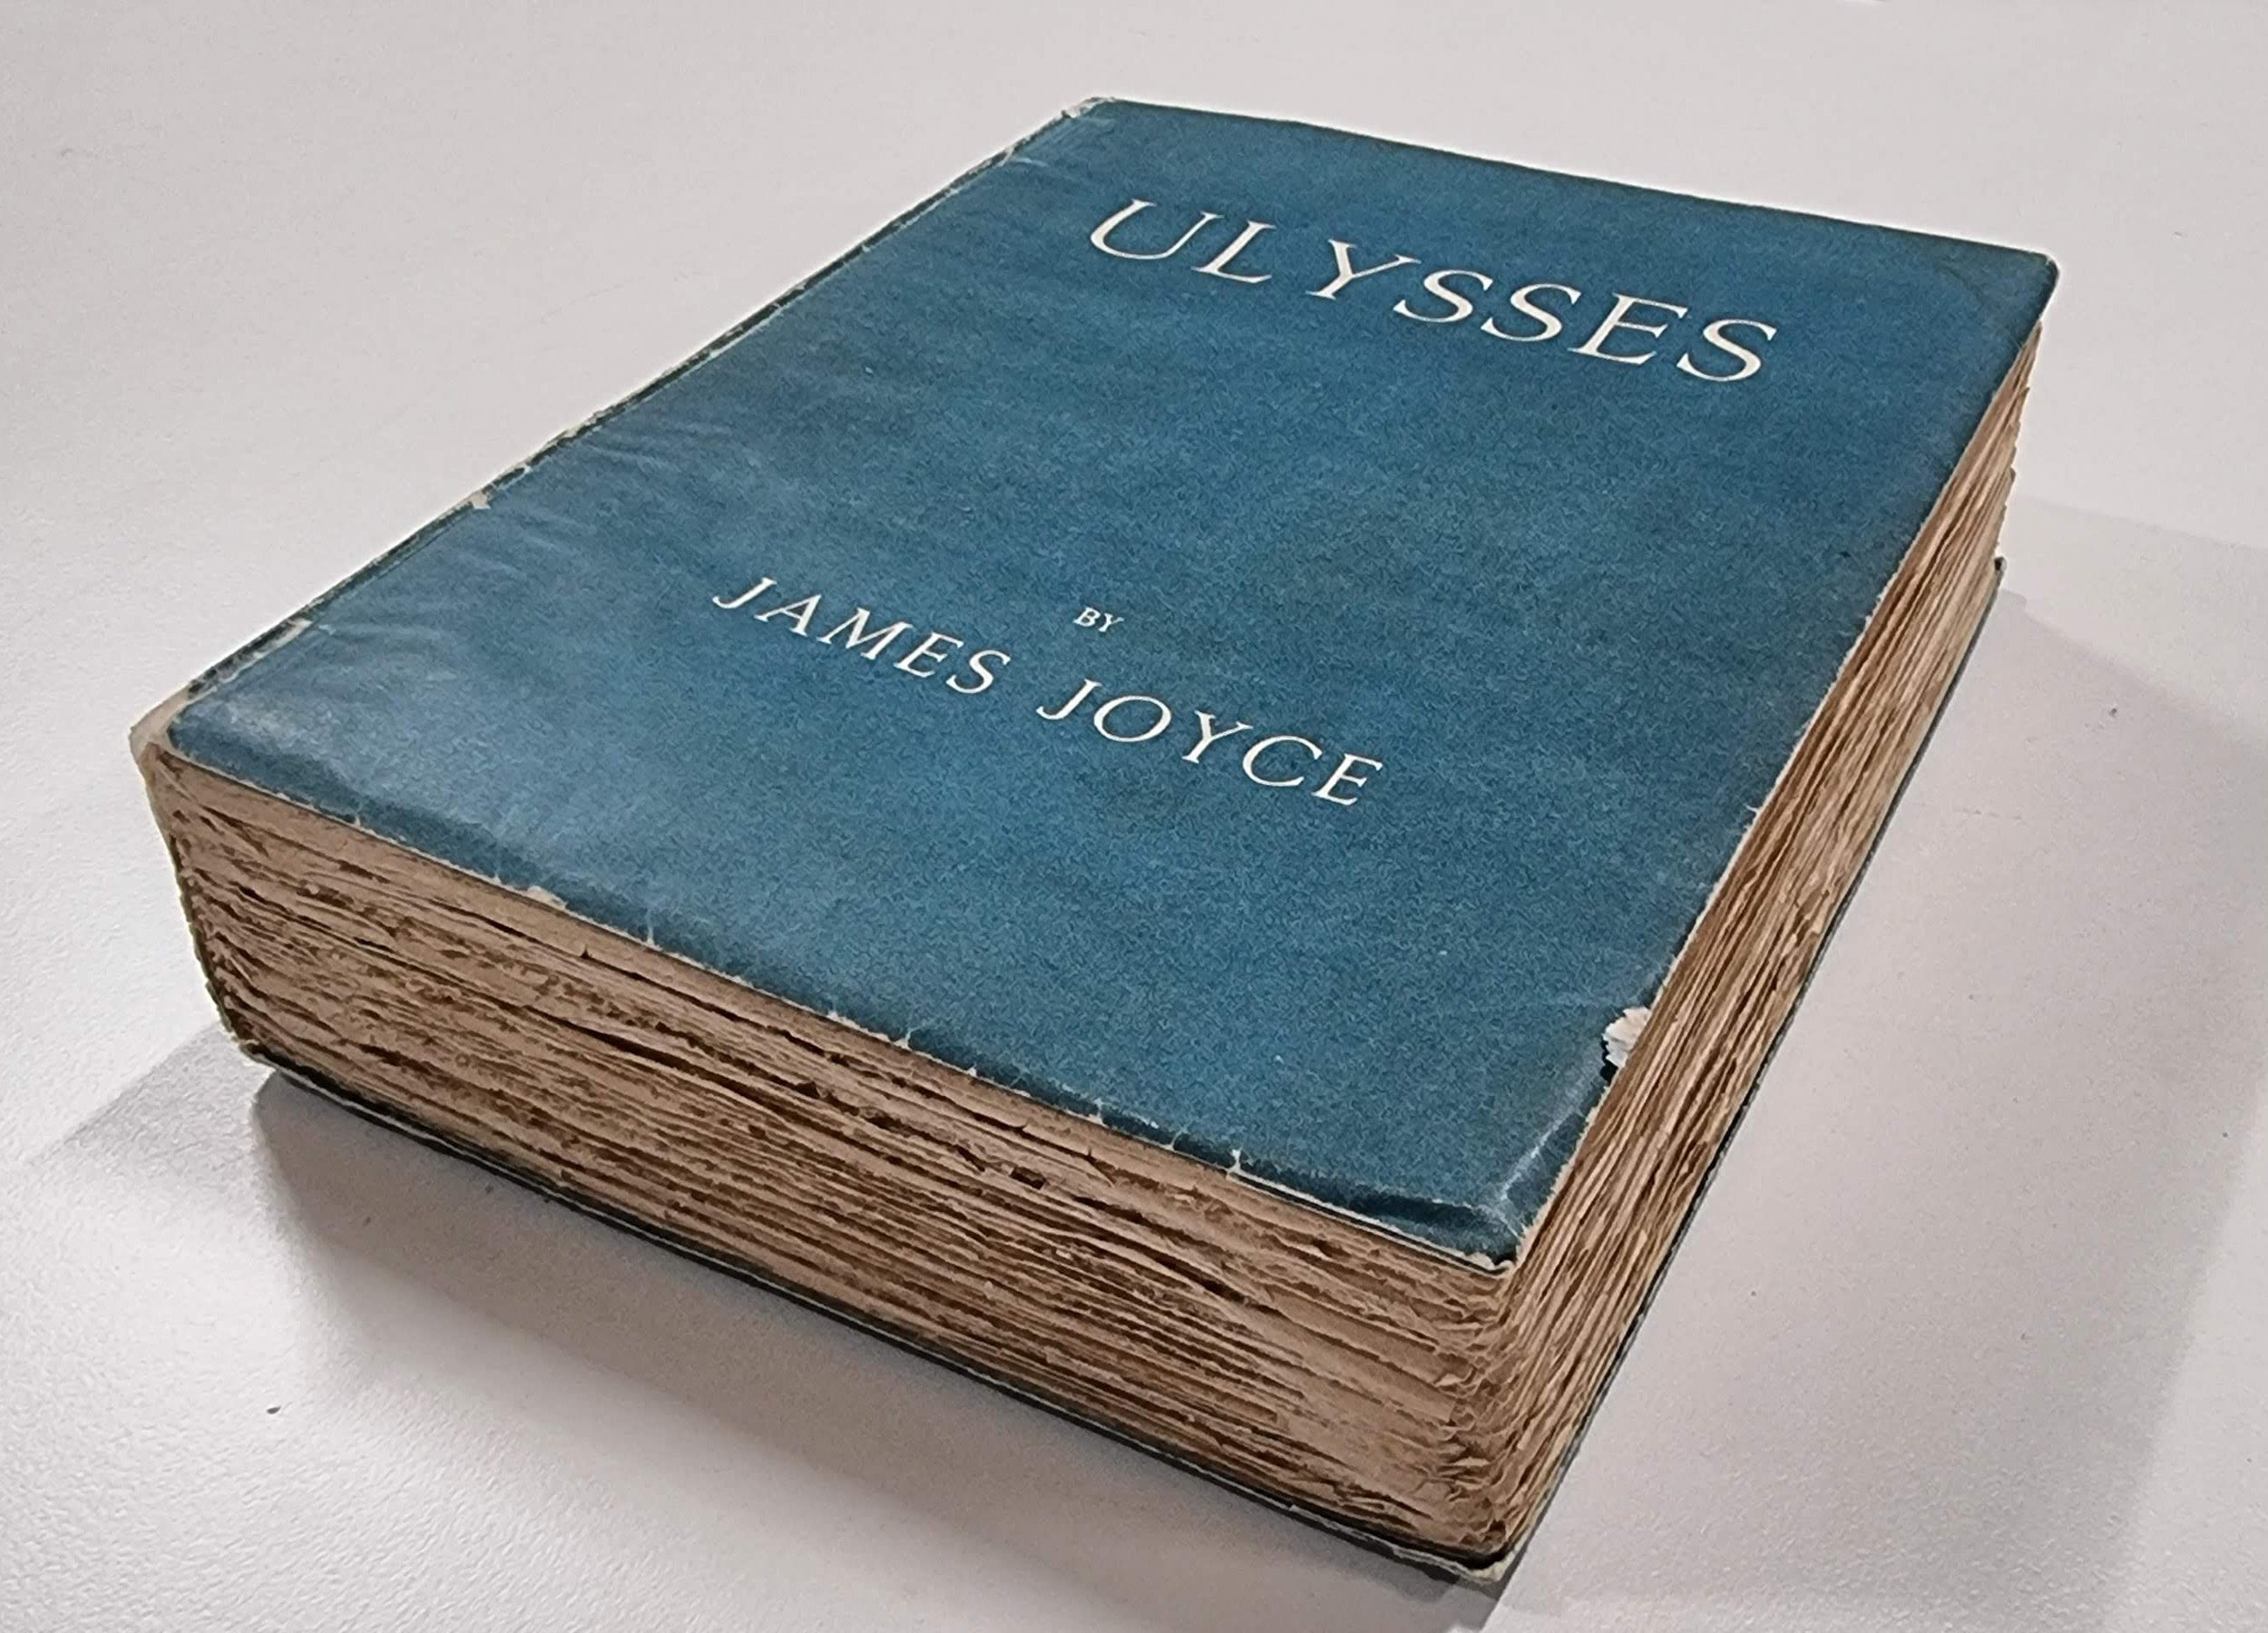 "Ulysses" first edition, cover. (Photo by Geoffrey Barker)